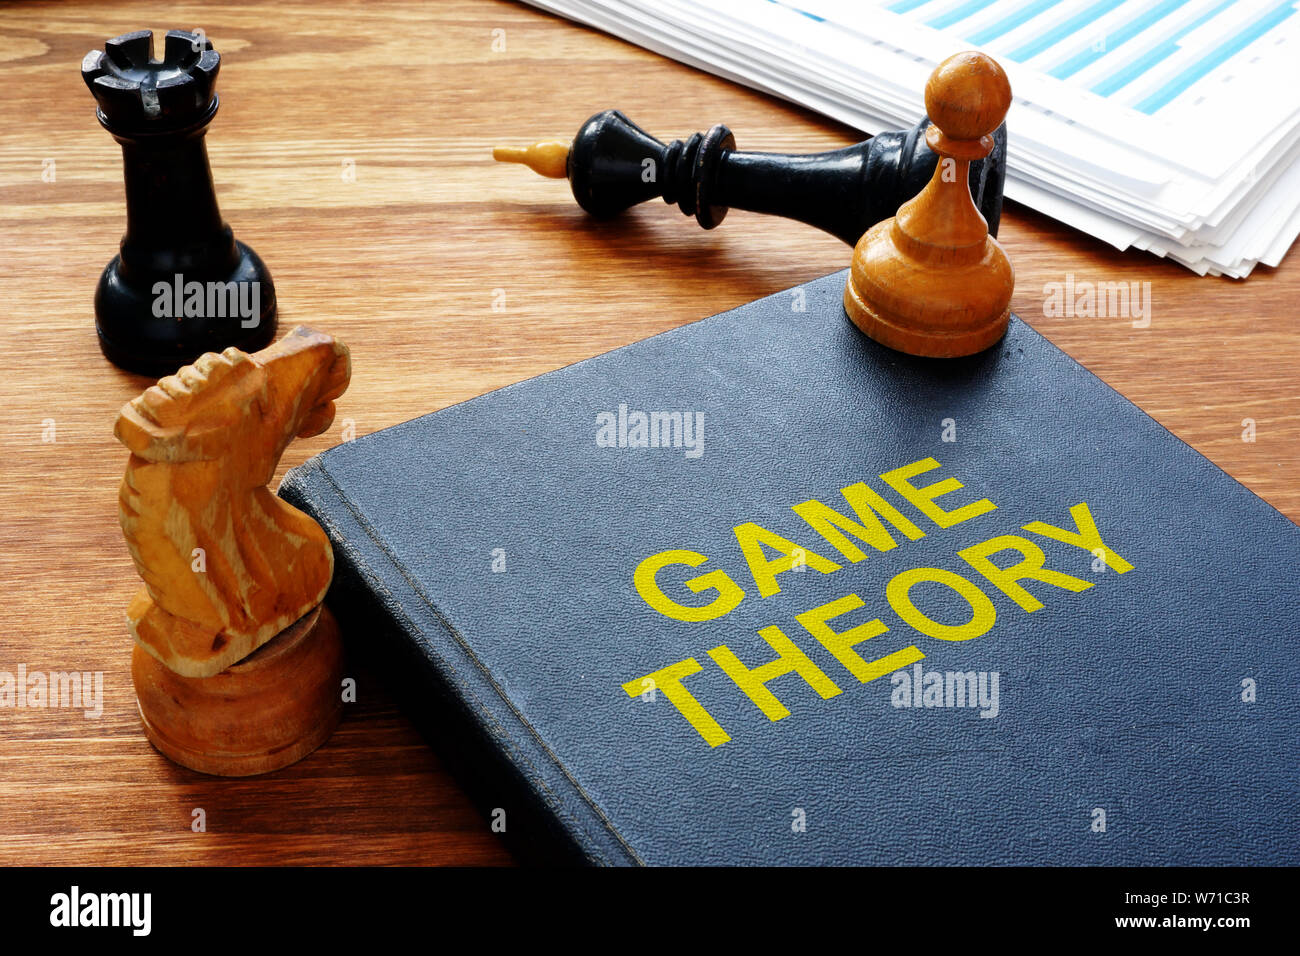 Game theory book and chess with documents. Stock Photo